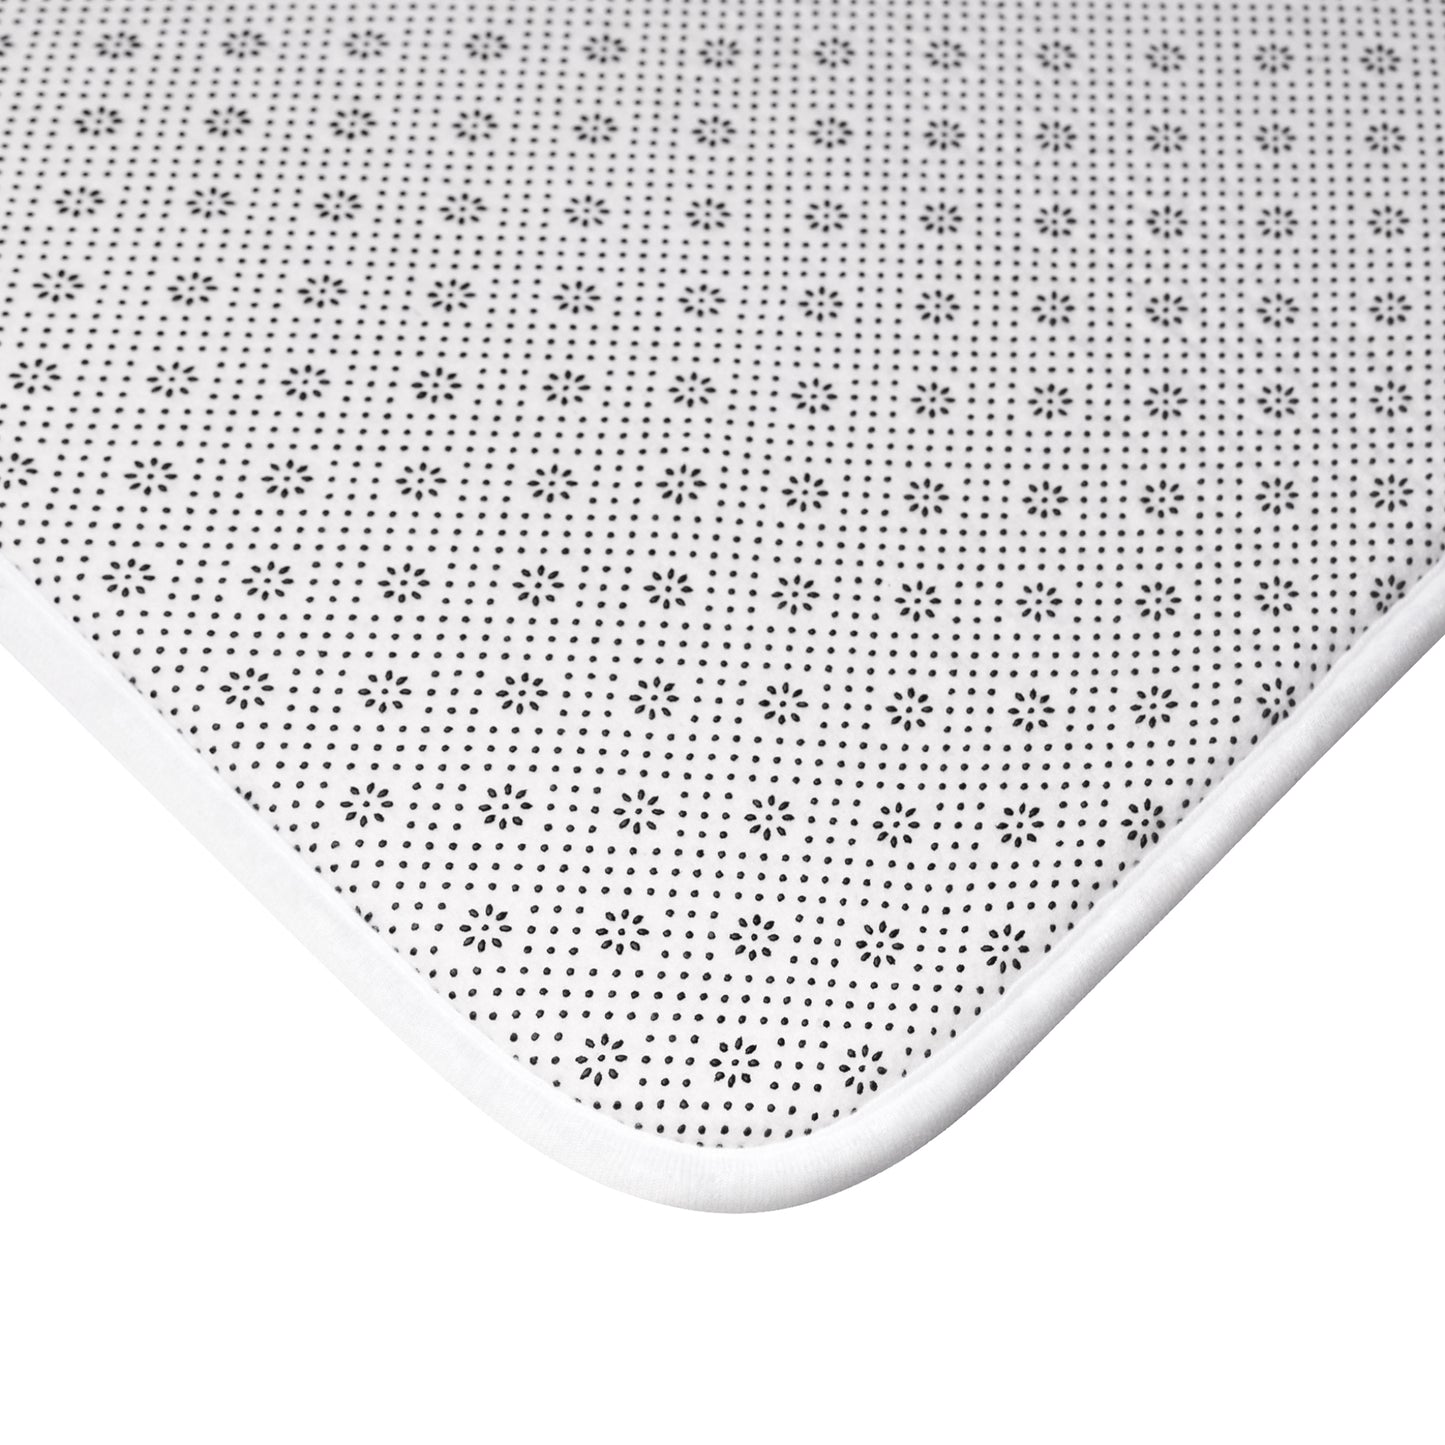 At the End of the Day - Bath Mat - Mat for Bathroom - Shower mat